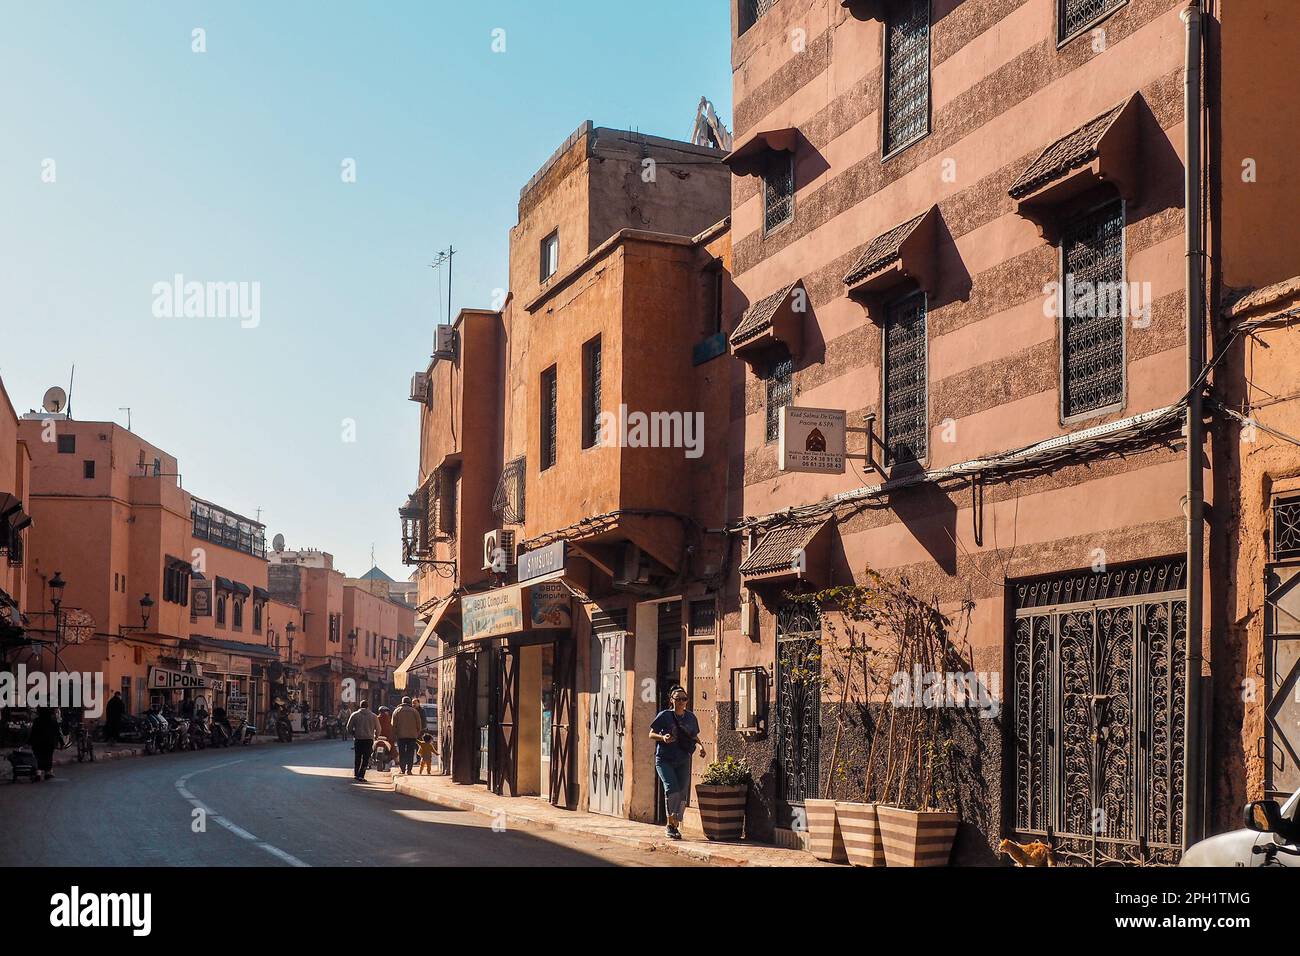 Marrakech, Morocco - January 02, 2020: People walking in typical Moroccan city, sun shines to houses with decorated windows and gates, walls made of r Stock Photo